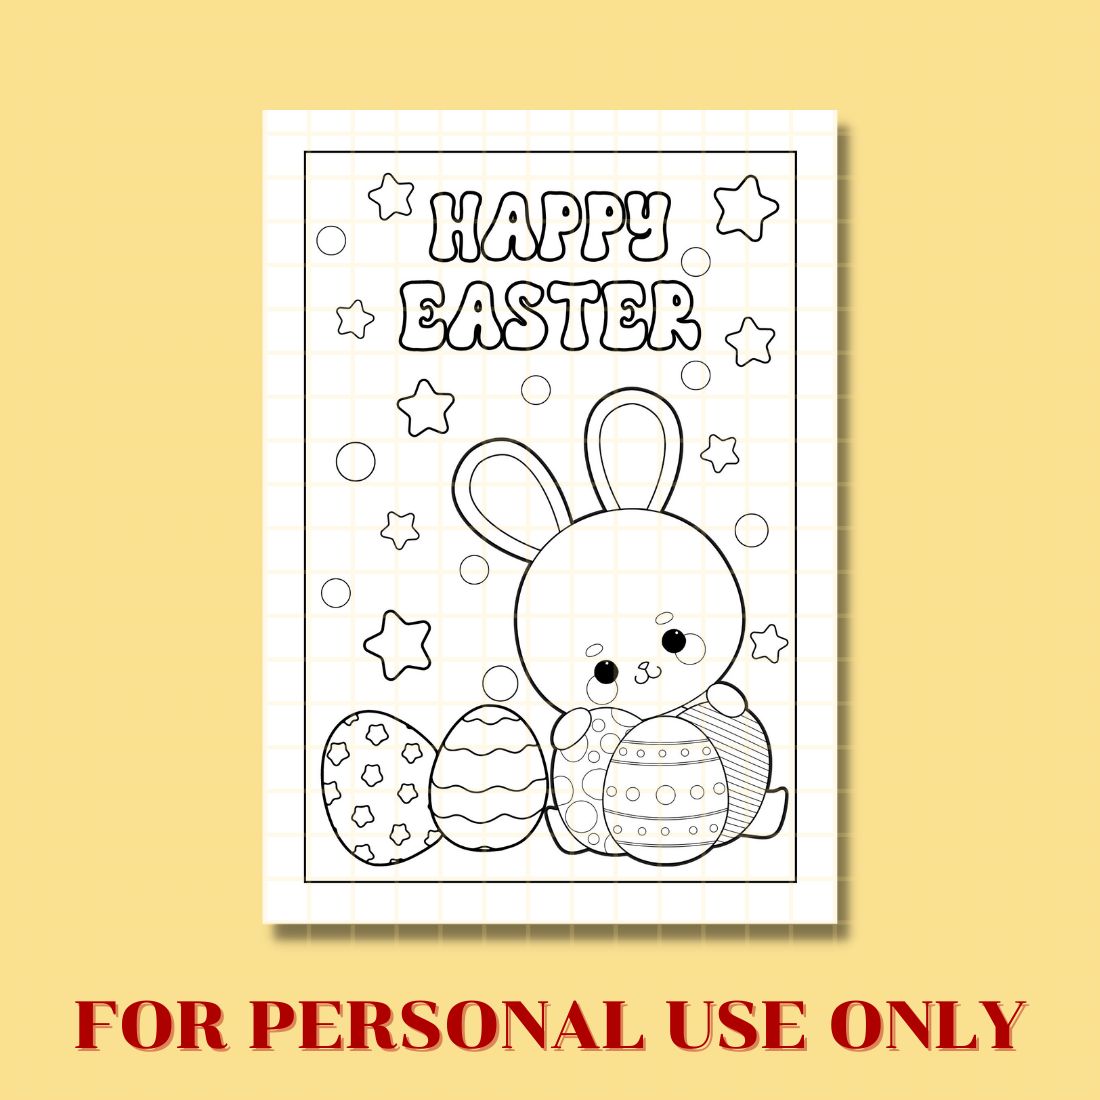 FREE HAPPY EASTER COLORING PAGE preview image.